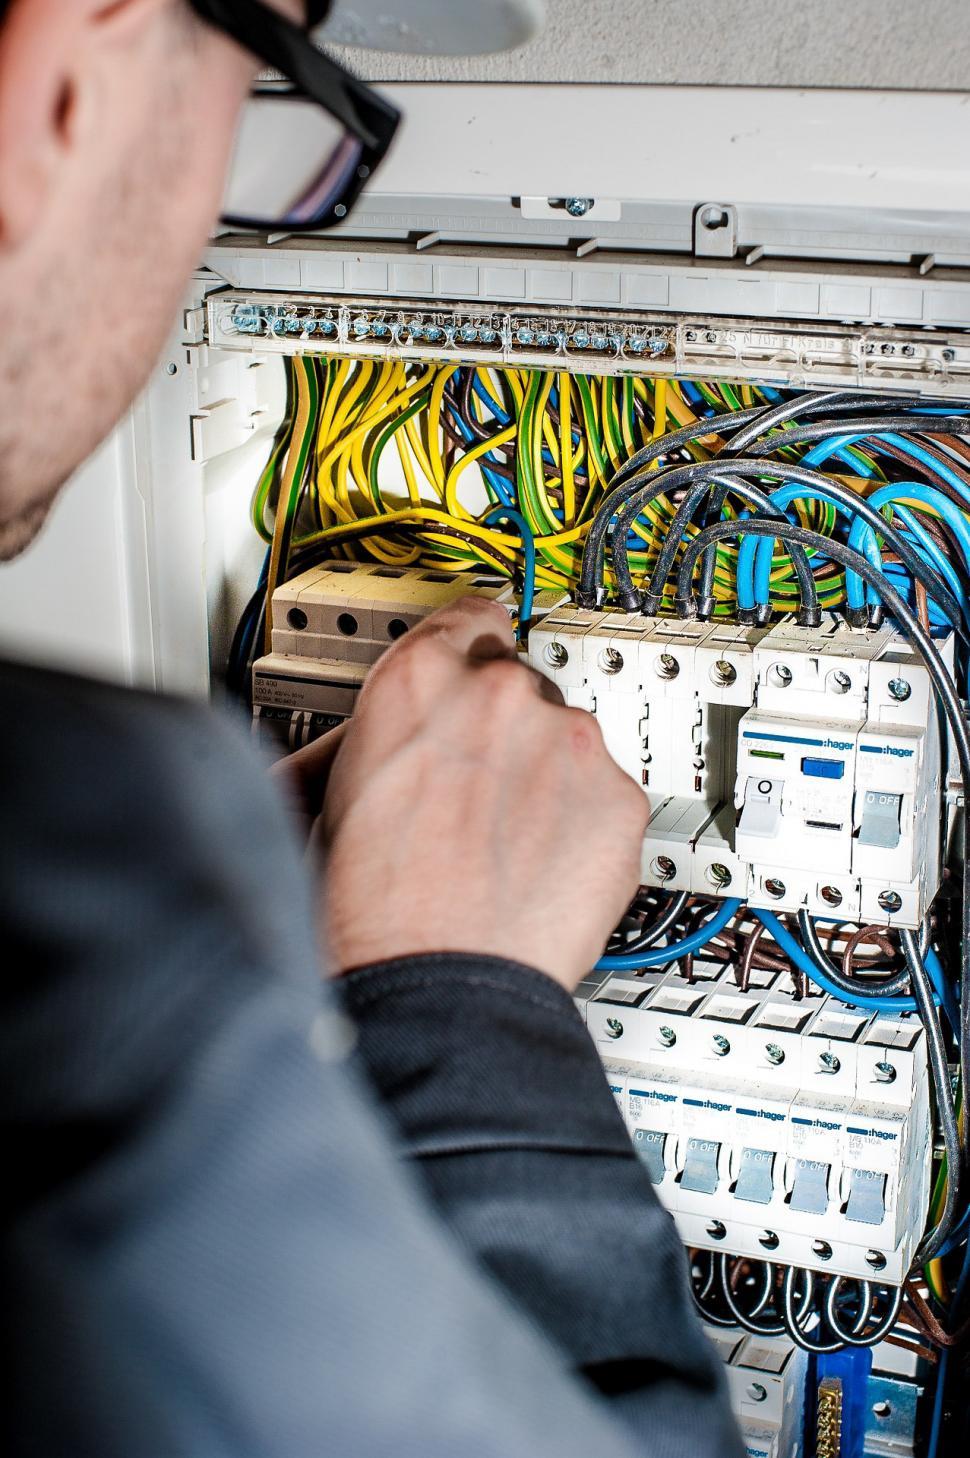 Free Image of Man Working on Electrical Panel 